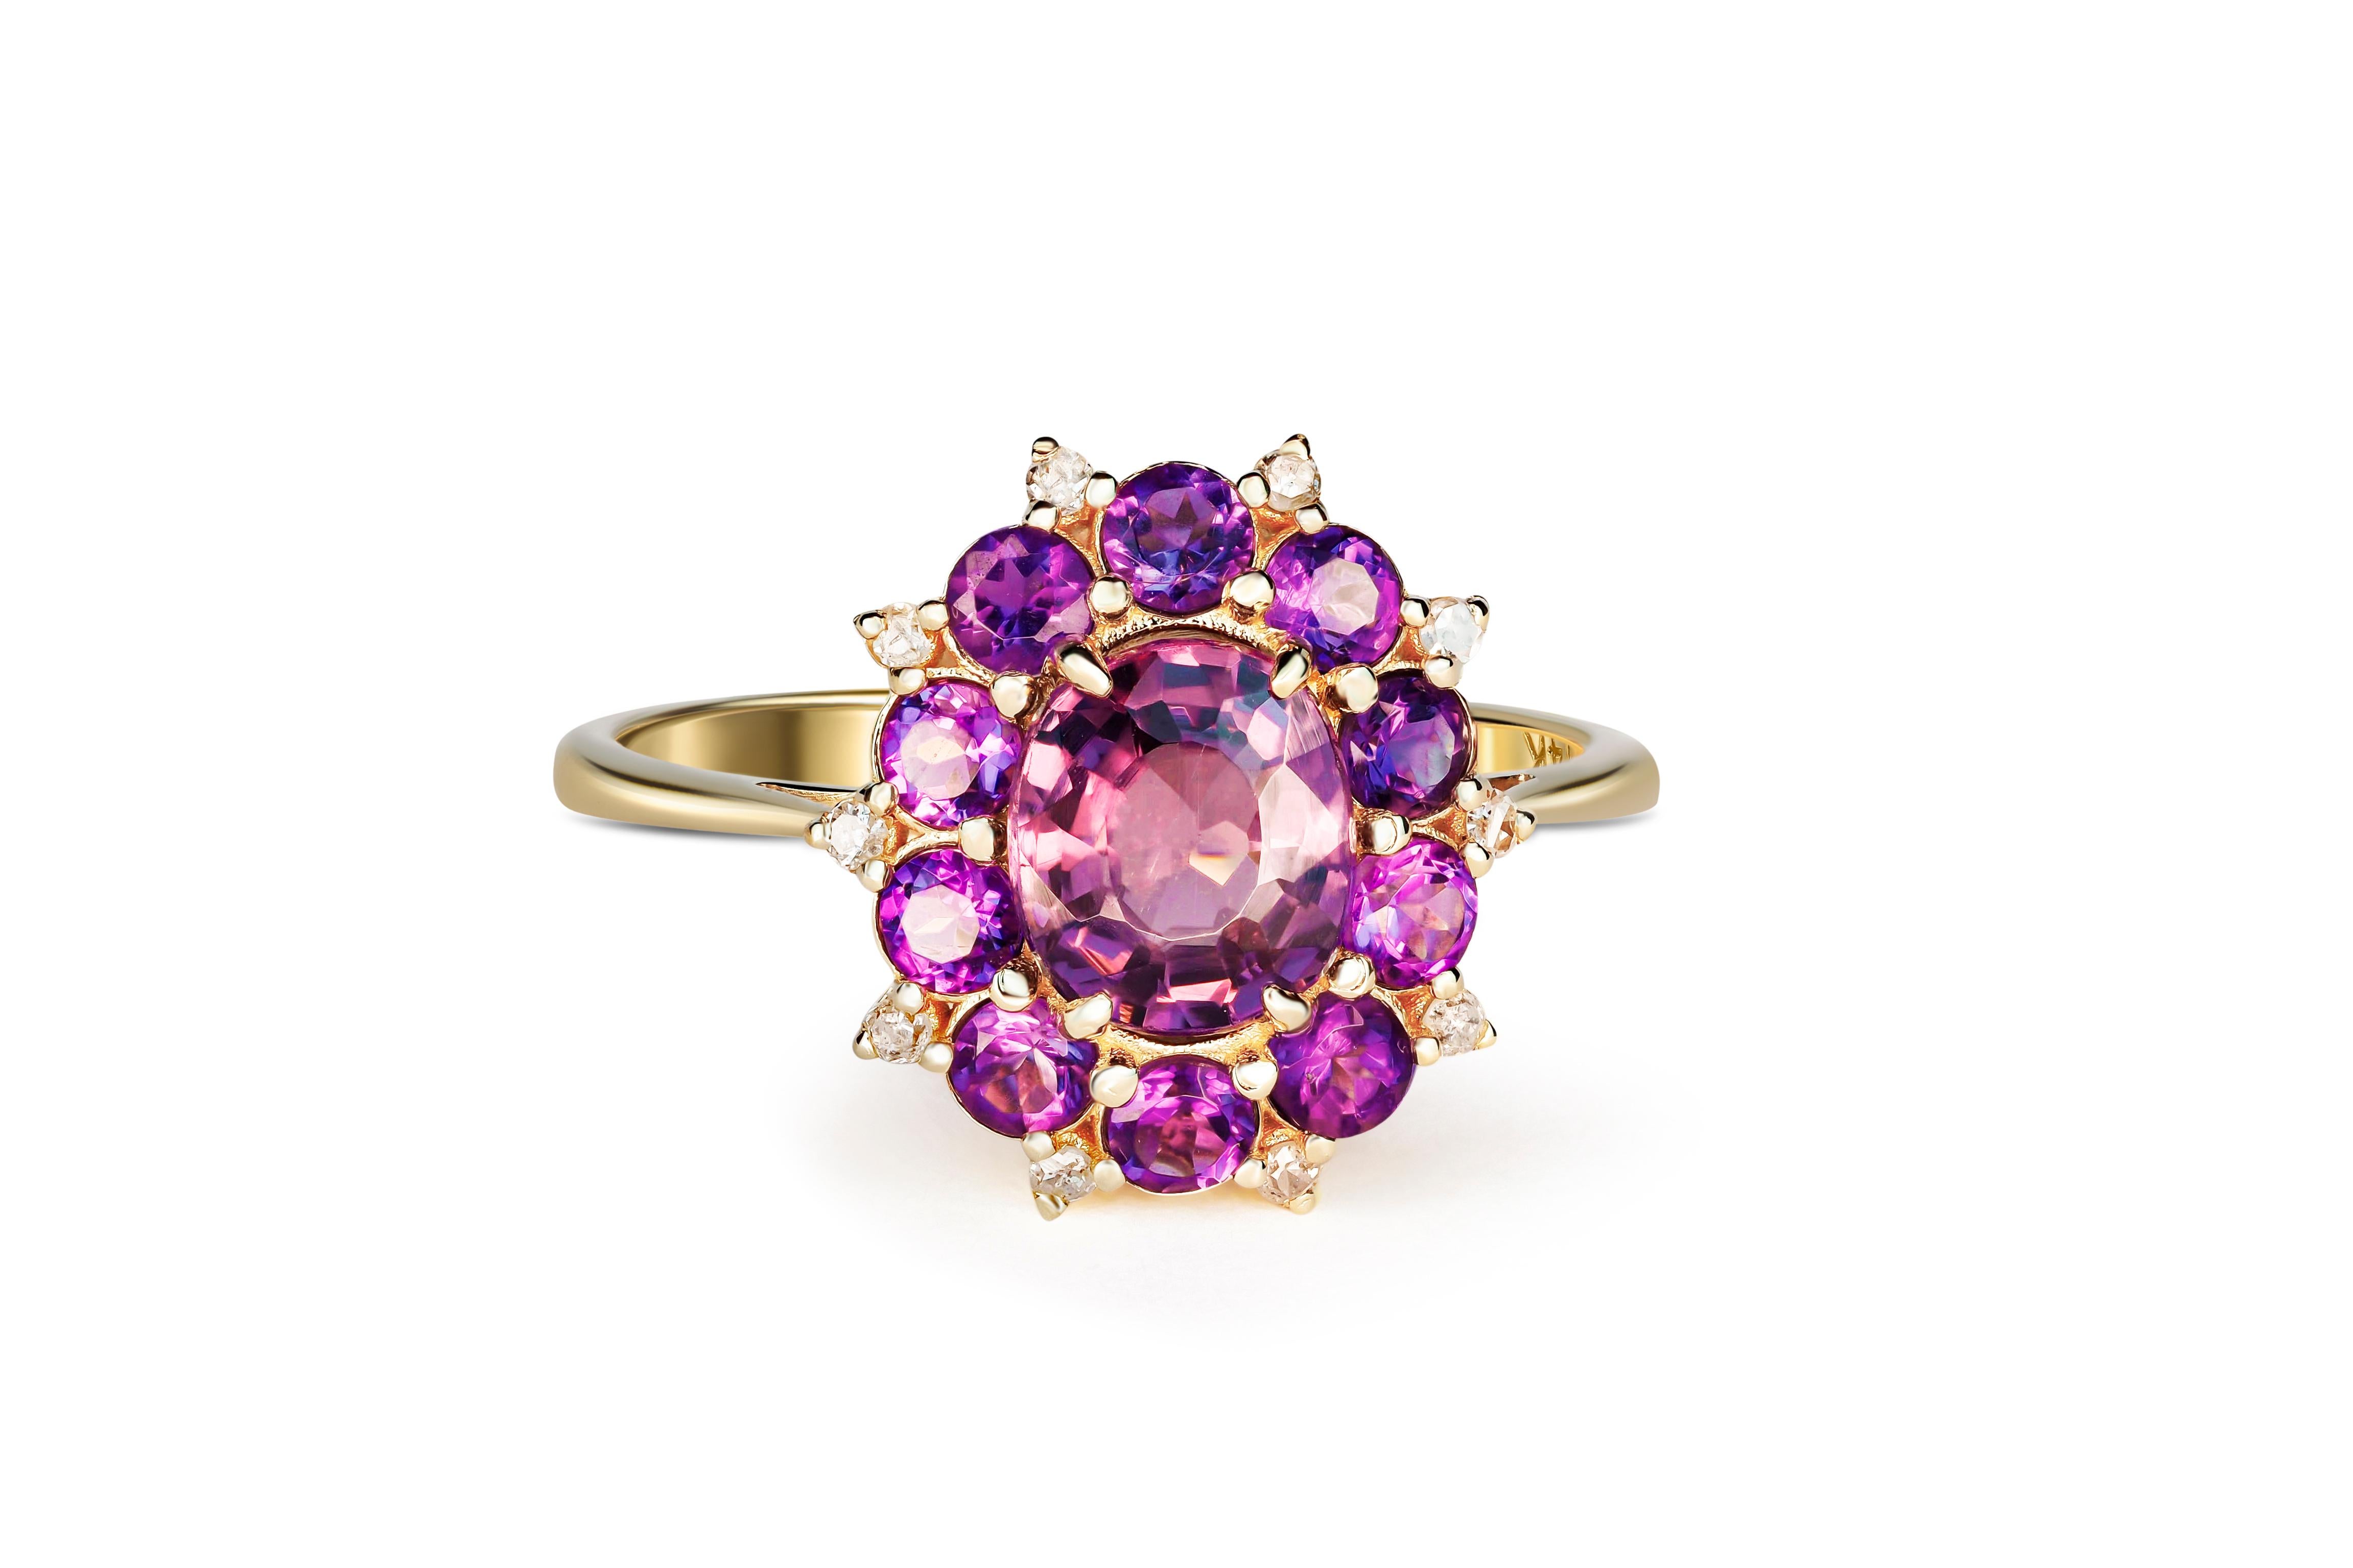 Modern Lavender Spinel Gold Ring, 14k Gold Ring with Spinel, Amethyst and Diamonds